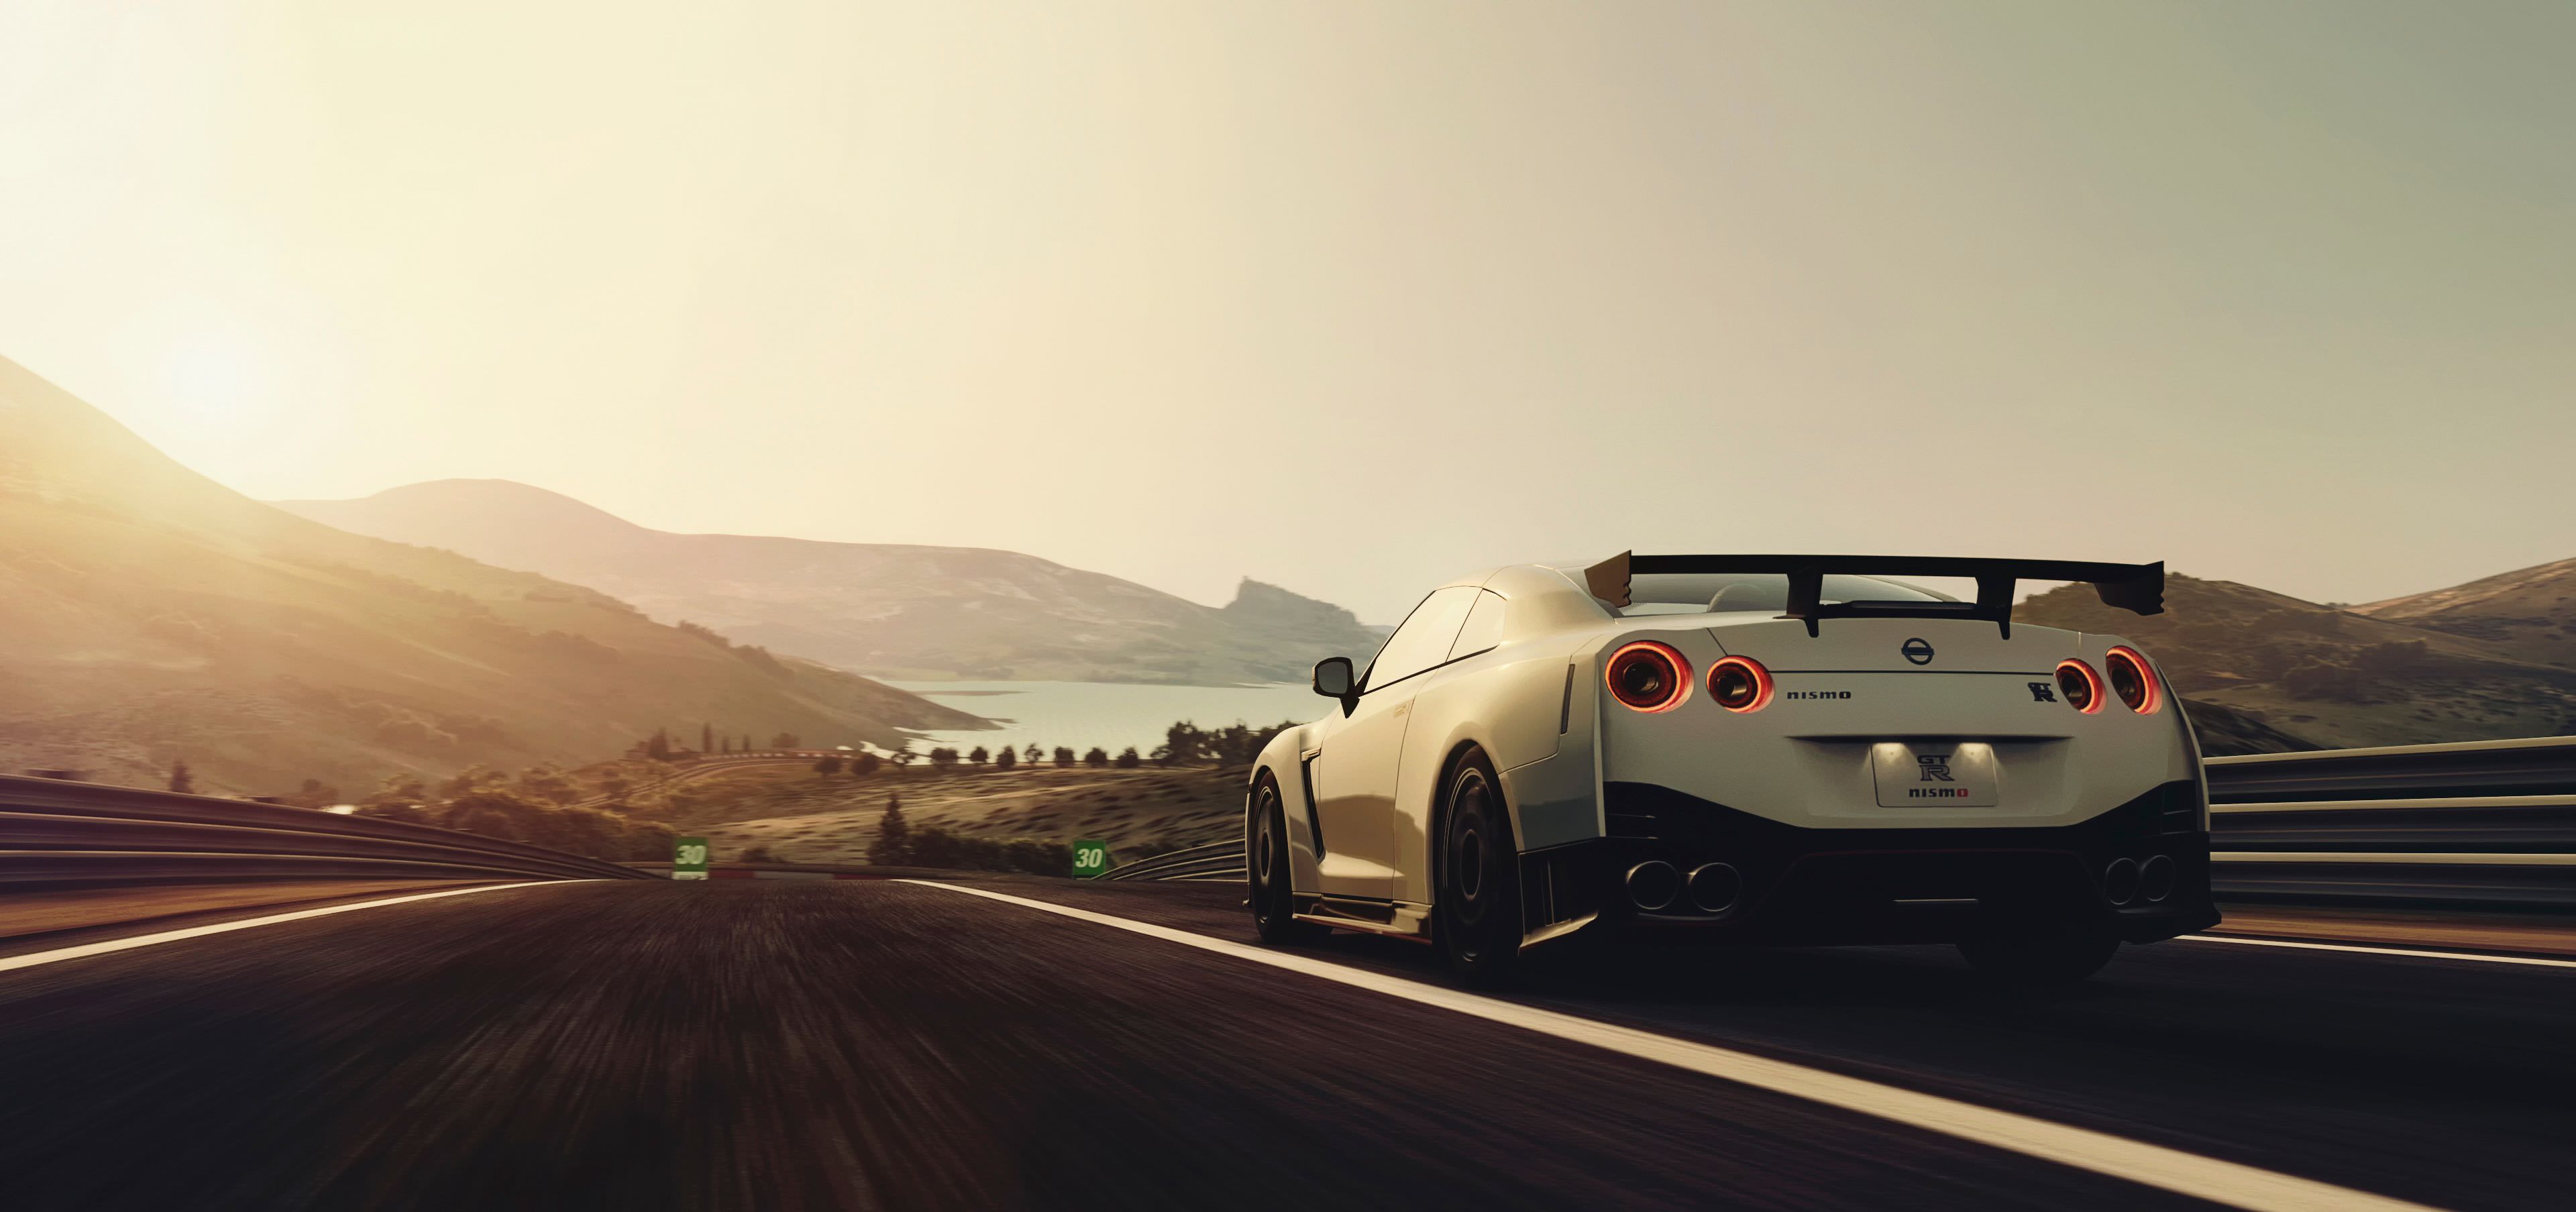 Download Nissan Gt R Nismo 1366x768 Best New Photos Pictures Backgrounds Wallpaper Getwalls Io